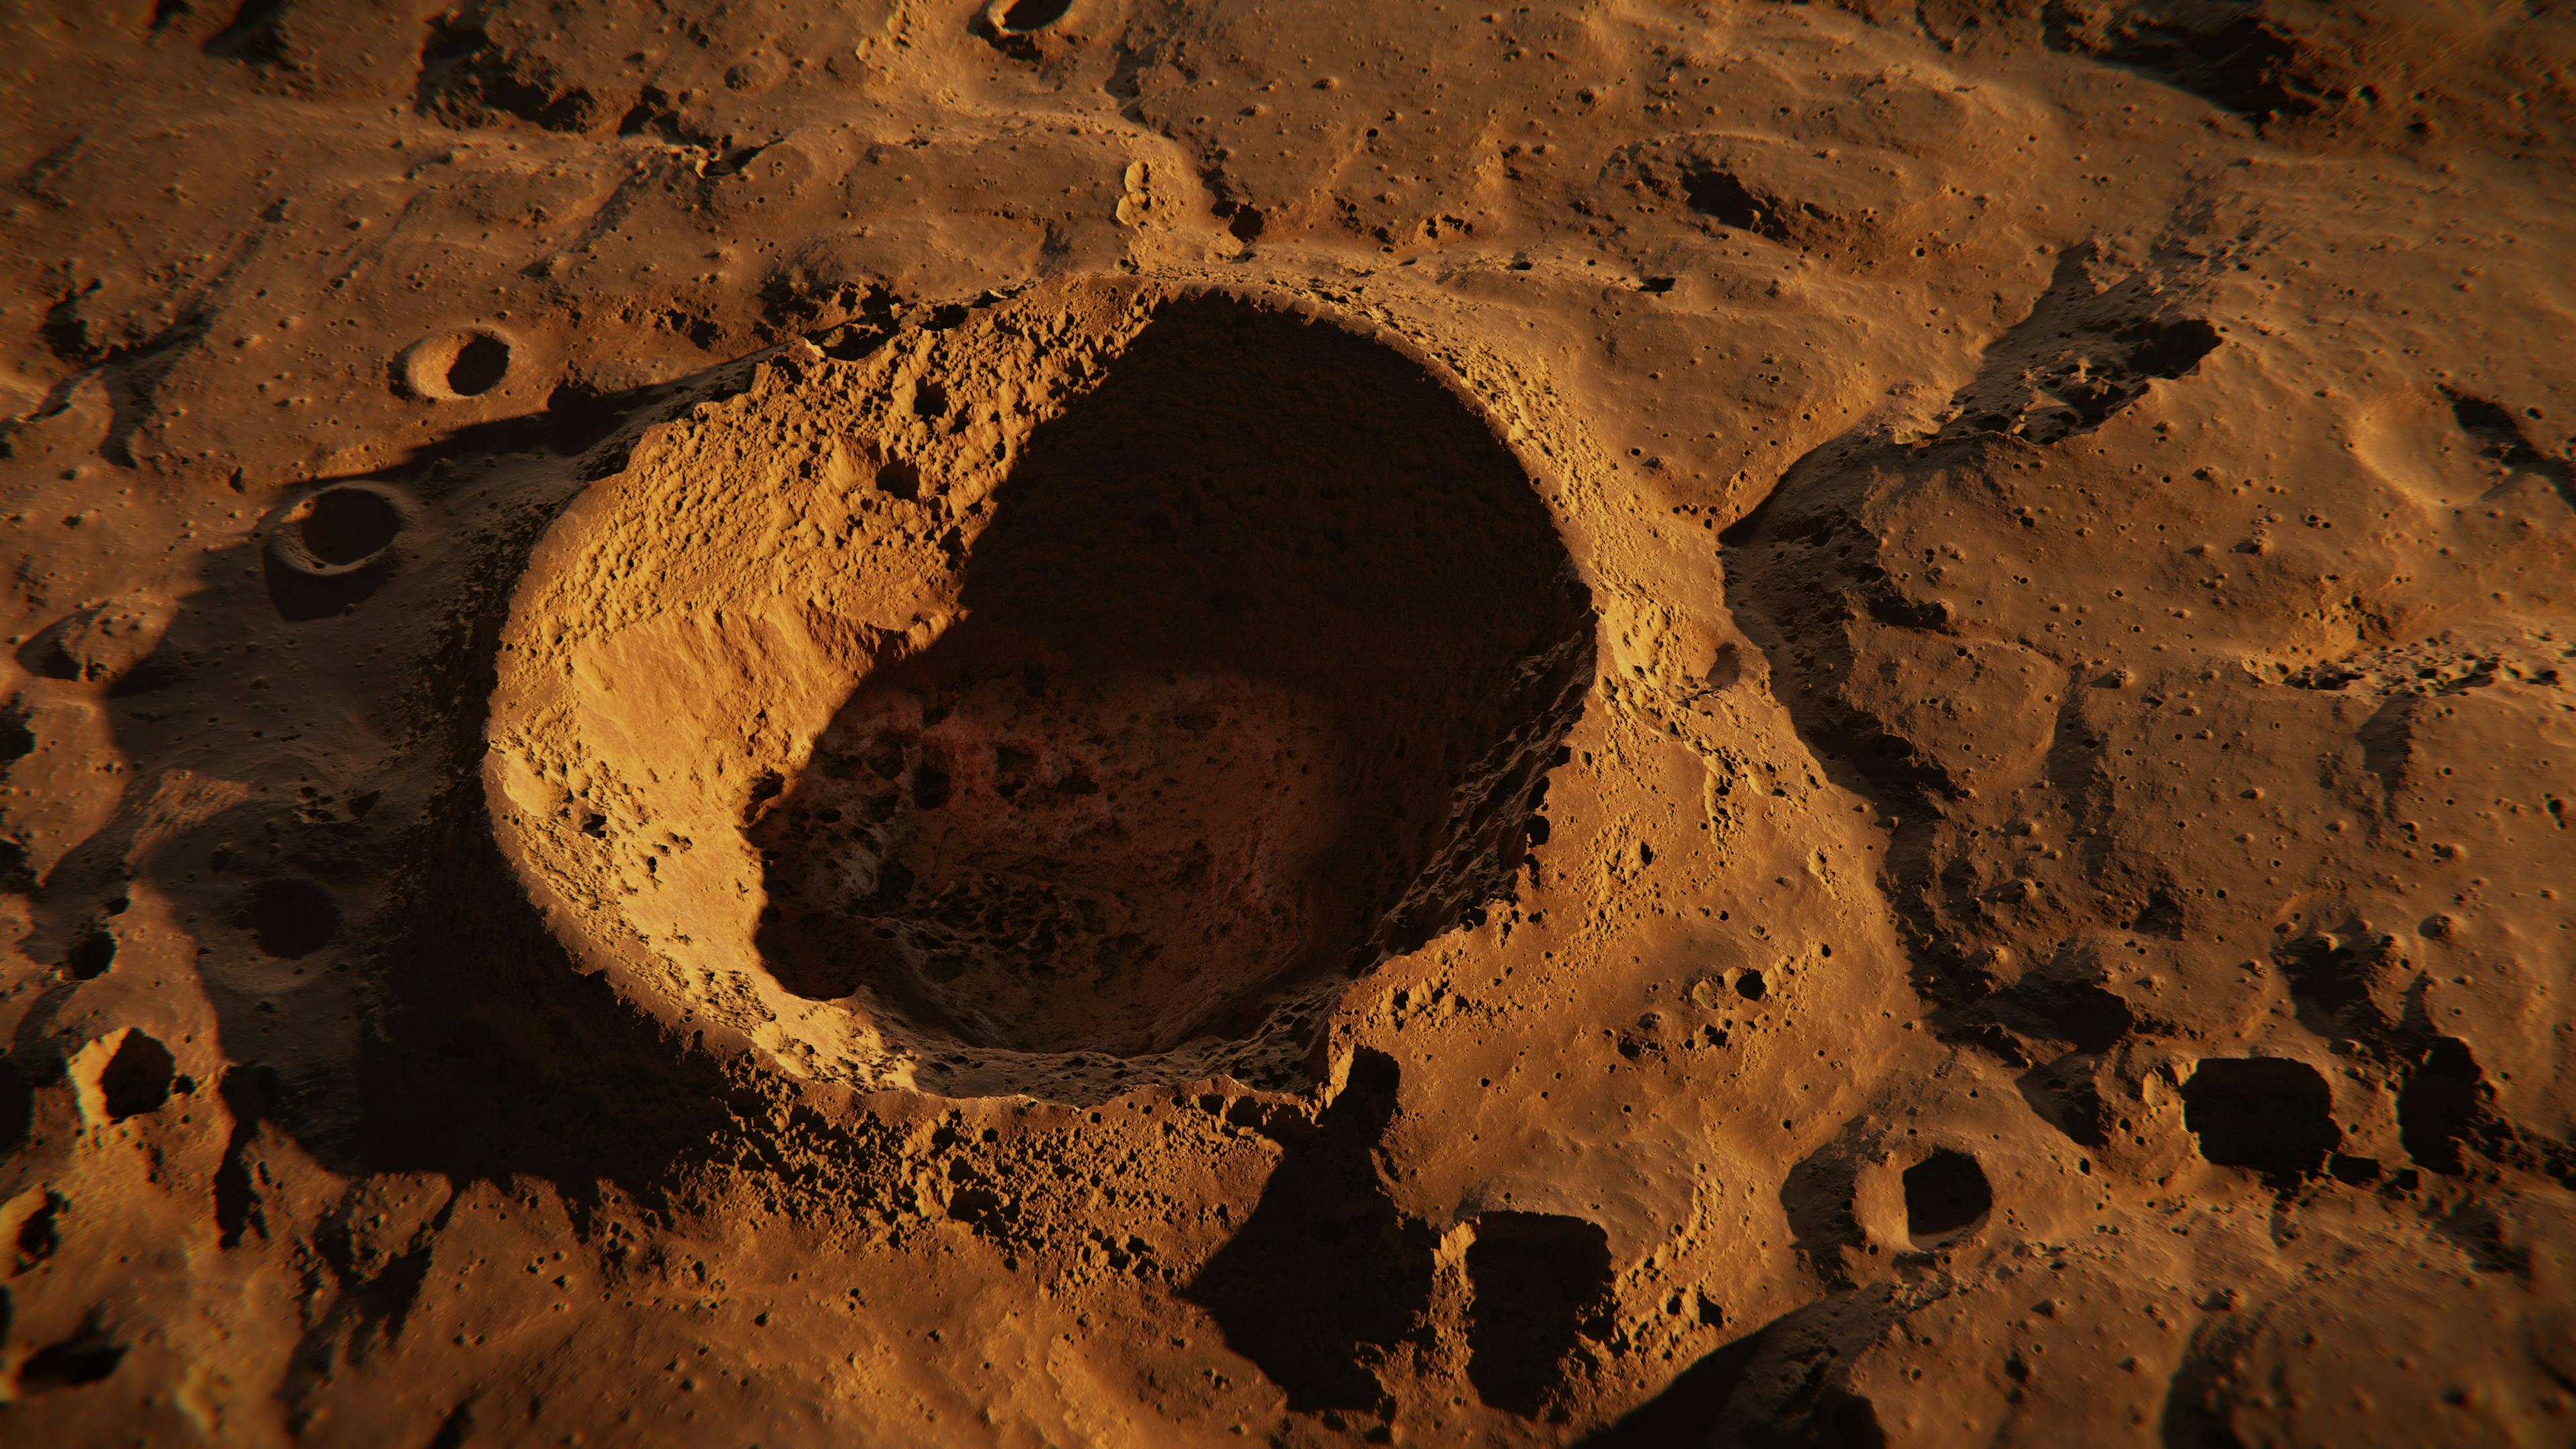 crater on planet Mars, landscape scene on the red planet | Image Credit: © dottedyeti - stock.adobe.com